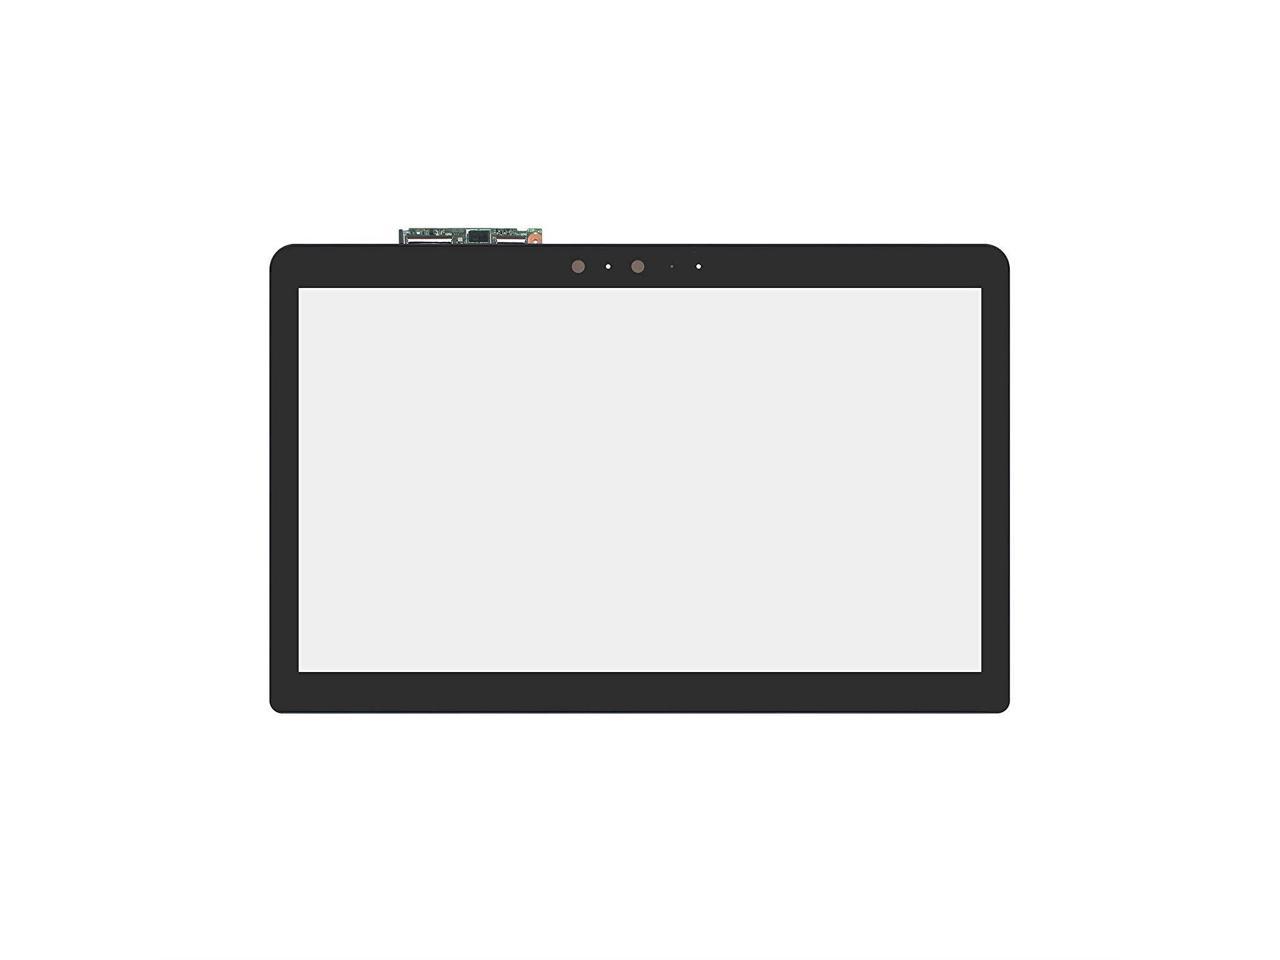 LCDOLED Replacement 15.6 inches Touch Screen Digitizer Front Glass Panel with Touch Control Board for ASUS Q534 Q534U Q534UX Q534UX-BBI7T16 Q534UX-BHI7T19 Q534UX-BI7T22 No Bezel